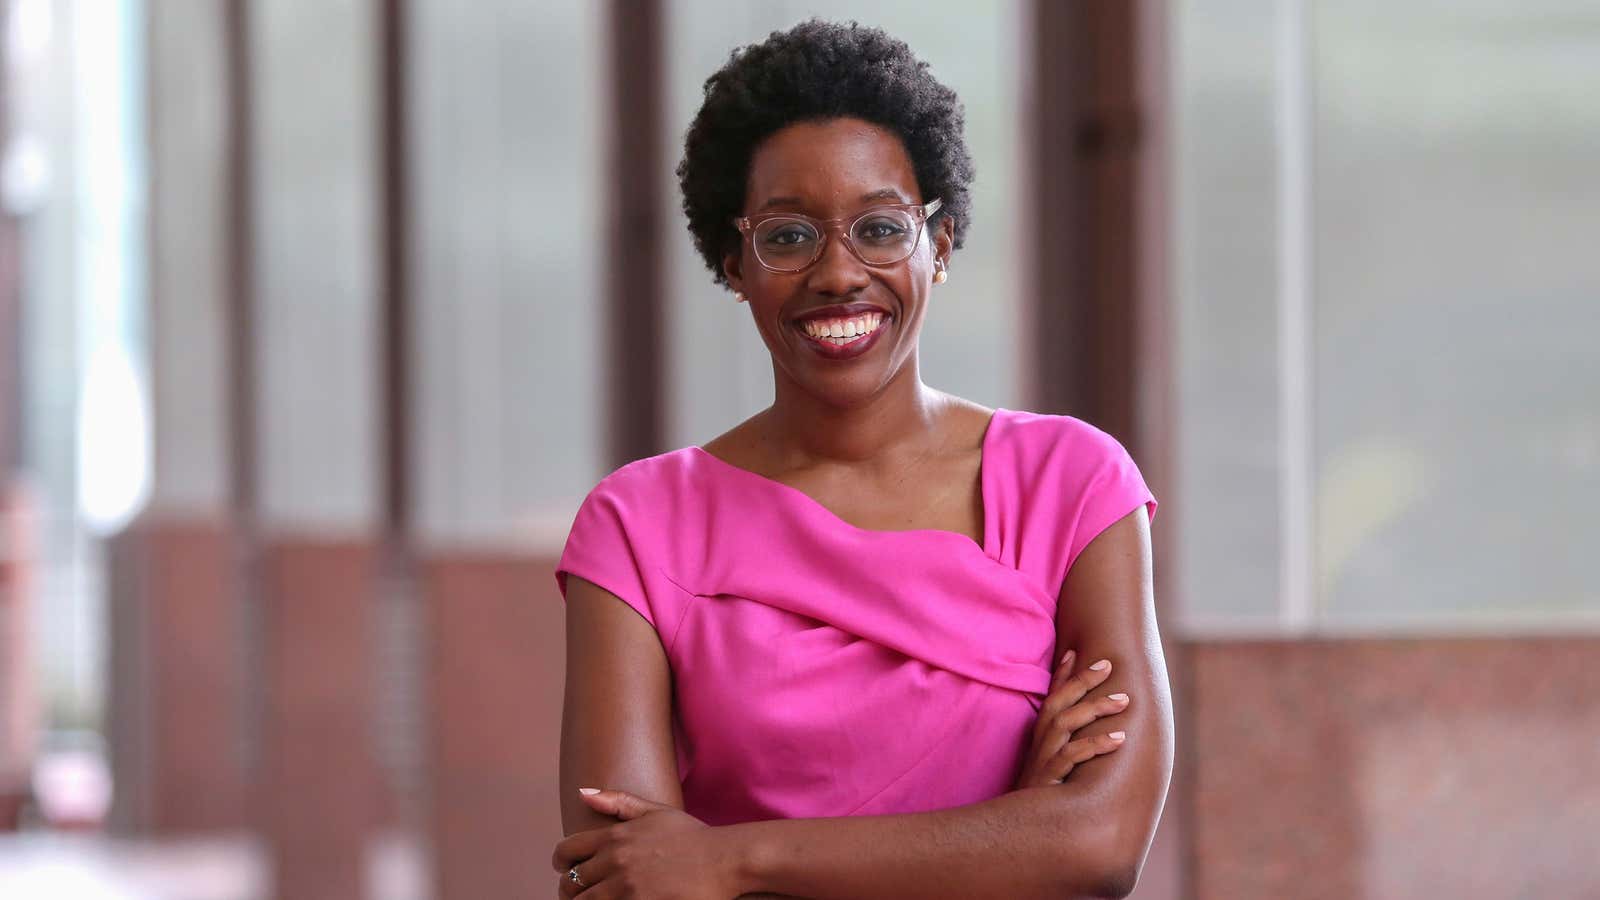 Lauren Underwood is among several candidates leaving their previous careers to run for office.